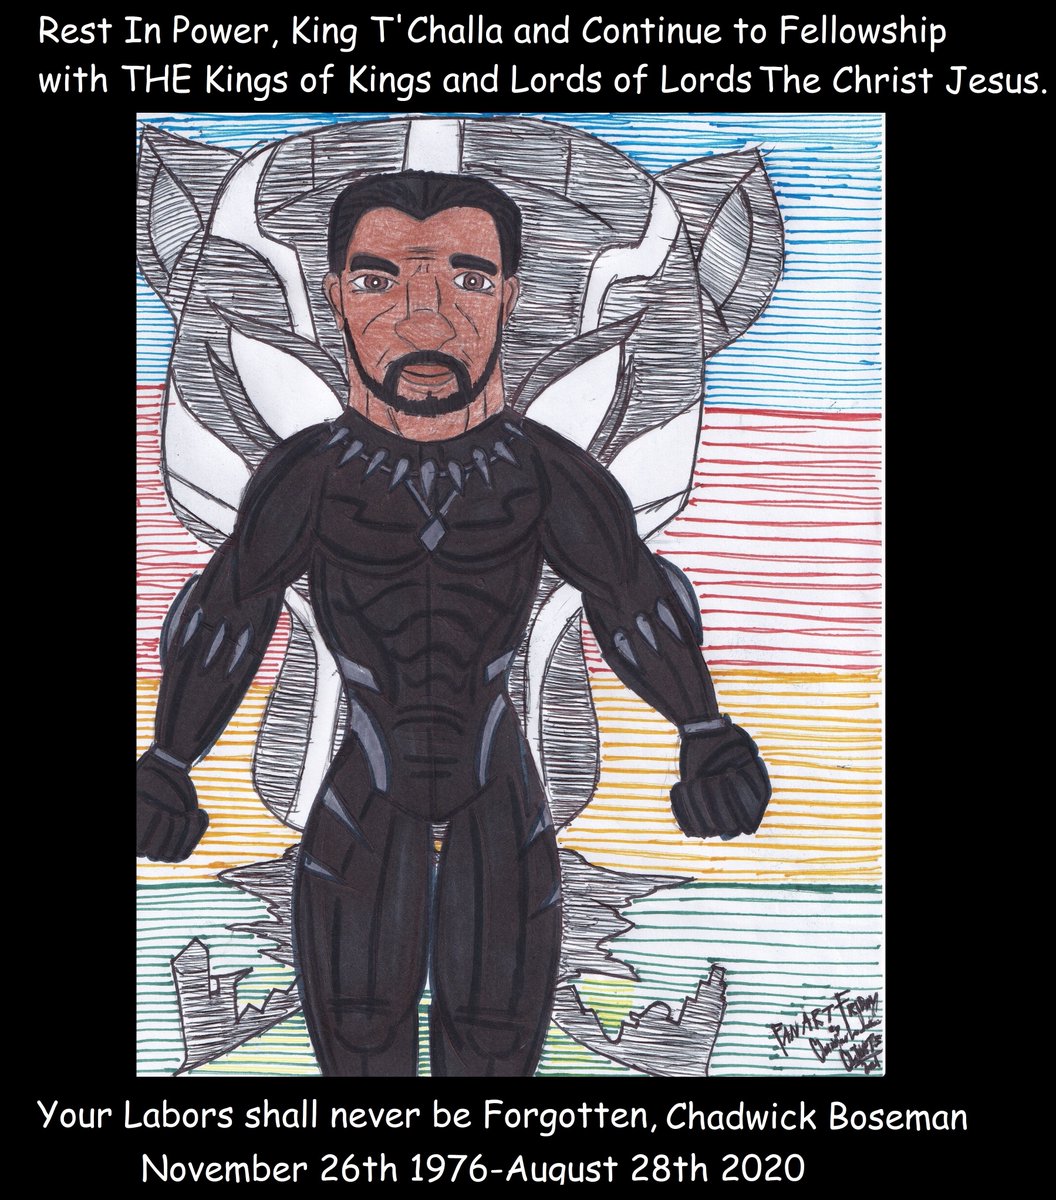 Good Friday evening, ladies and gentlemen!!! *Drum Rolls* Now Presenting my Fan Art Friday Sketch for Tonight. In honor of the recently passed Chadwick Boseman as T'Challa in the Marvel Cinematic Universe mega blockbuster
Black Panther (2018) https://t.co/d3hiv6qPUQ